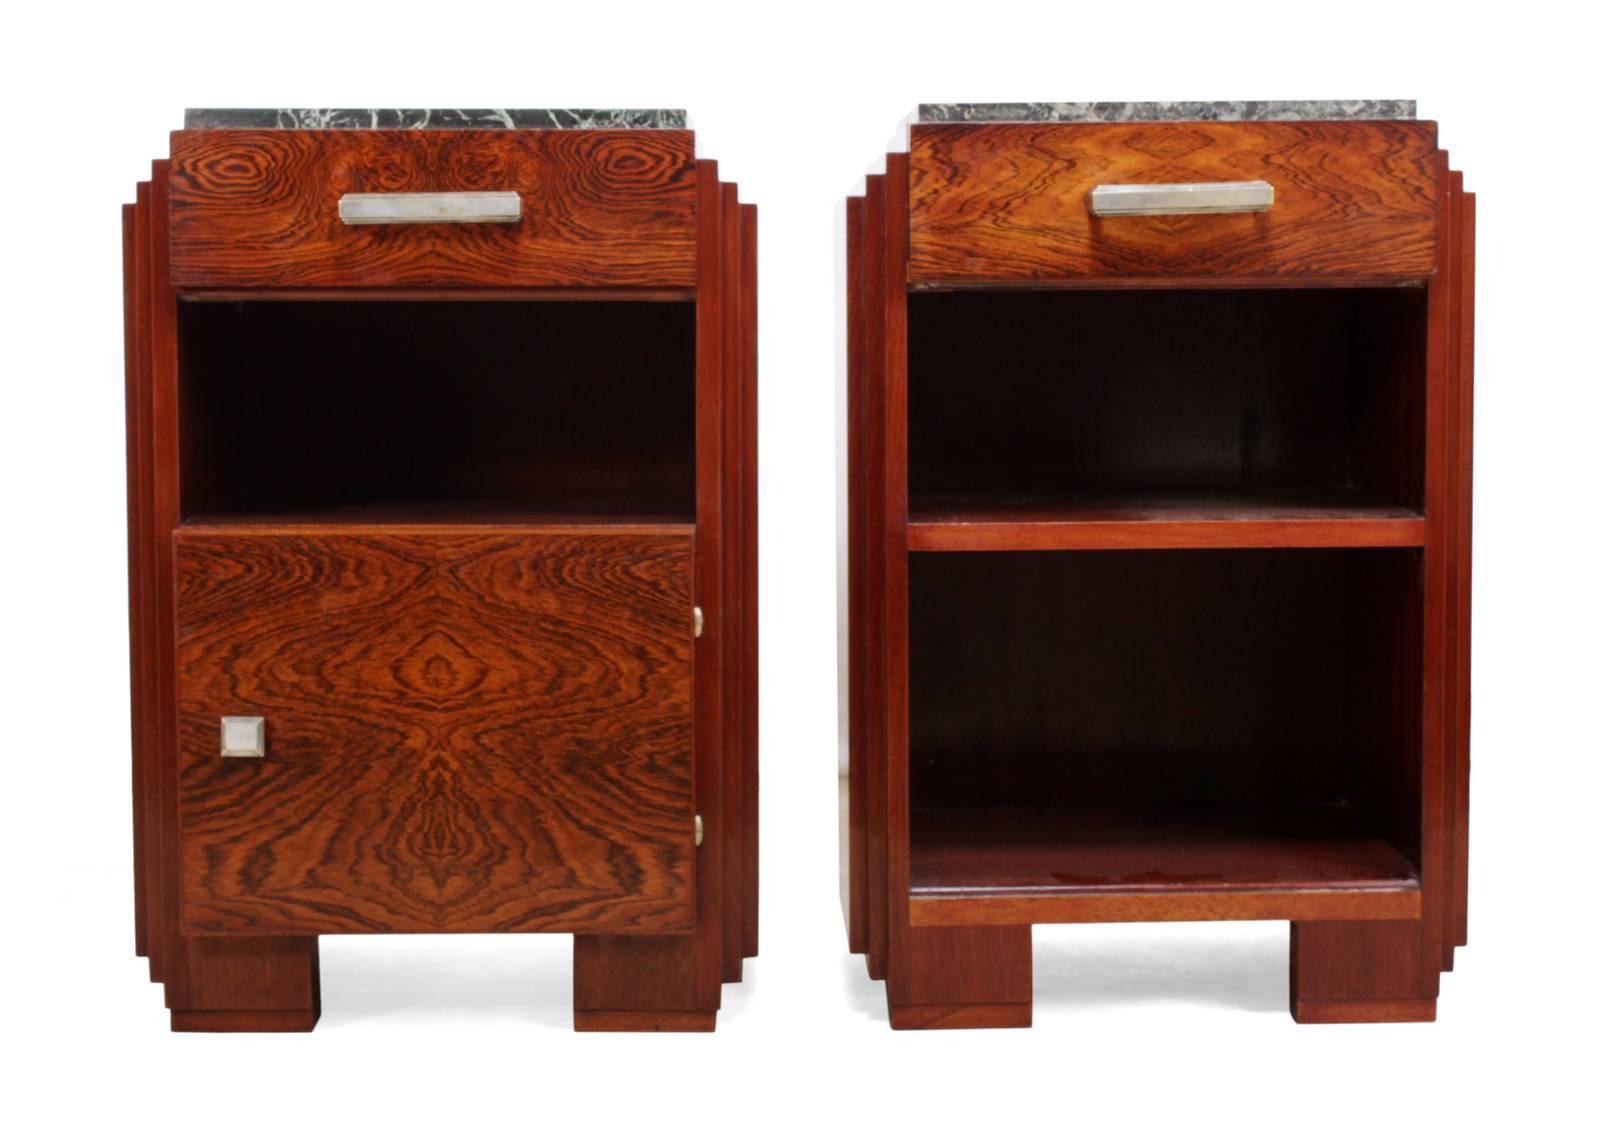 Early 20th Century Art Deco Bedside Cabinets with Marble Tops, circa 1920